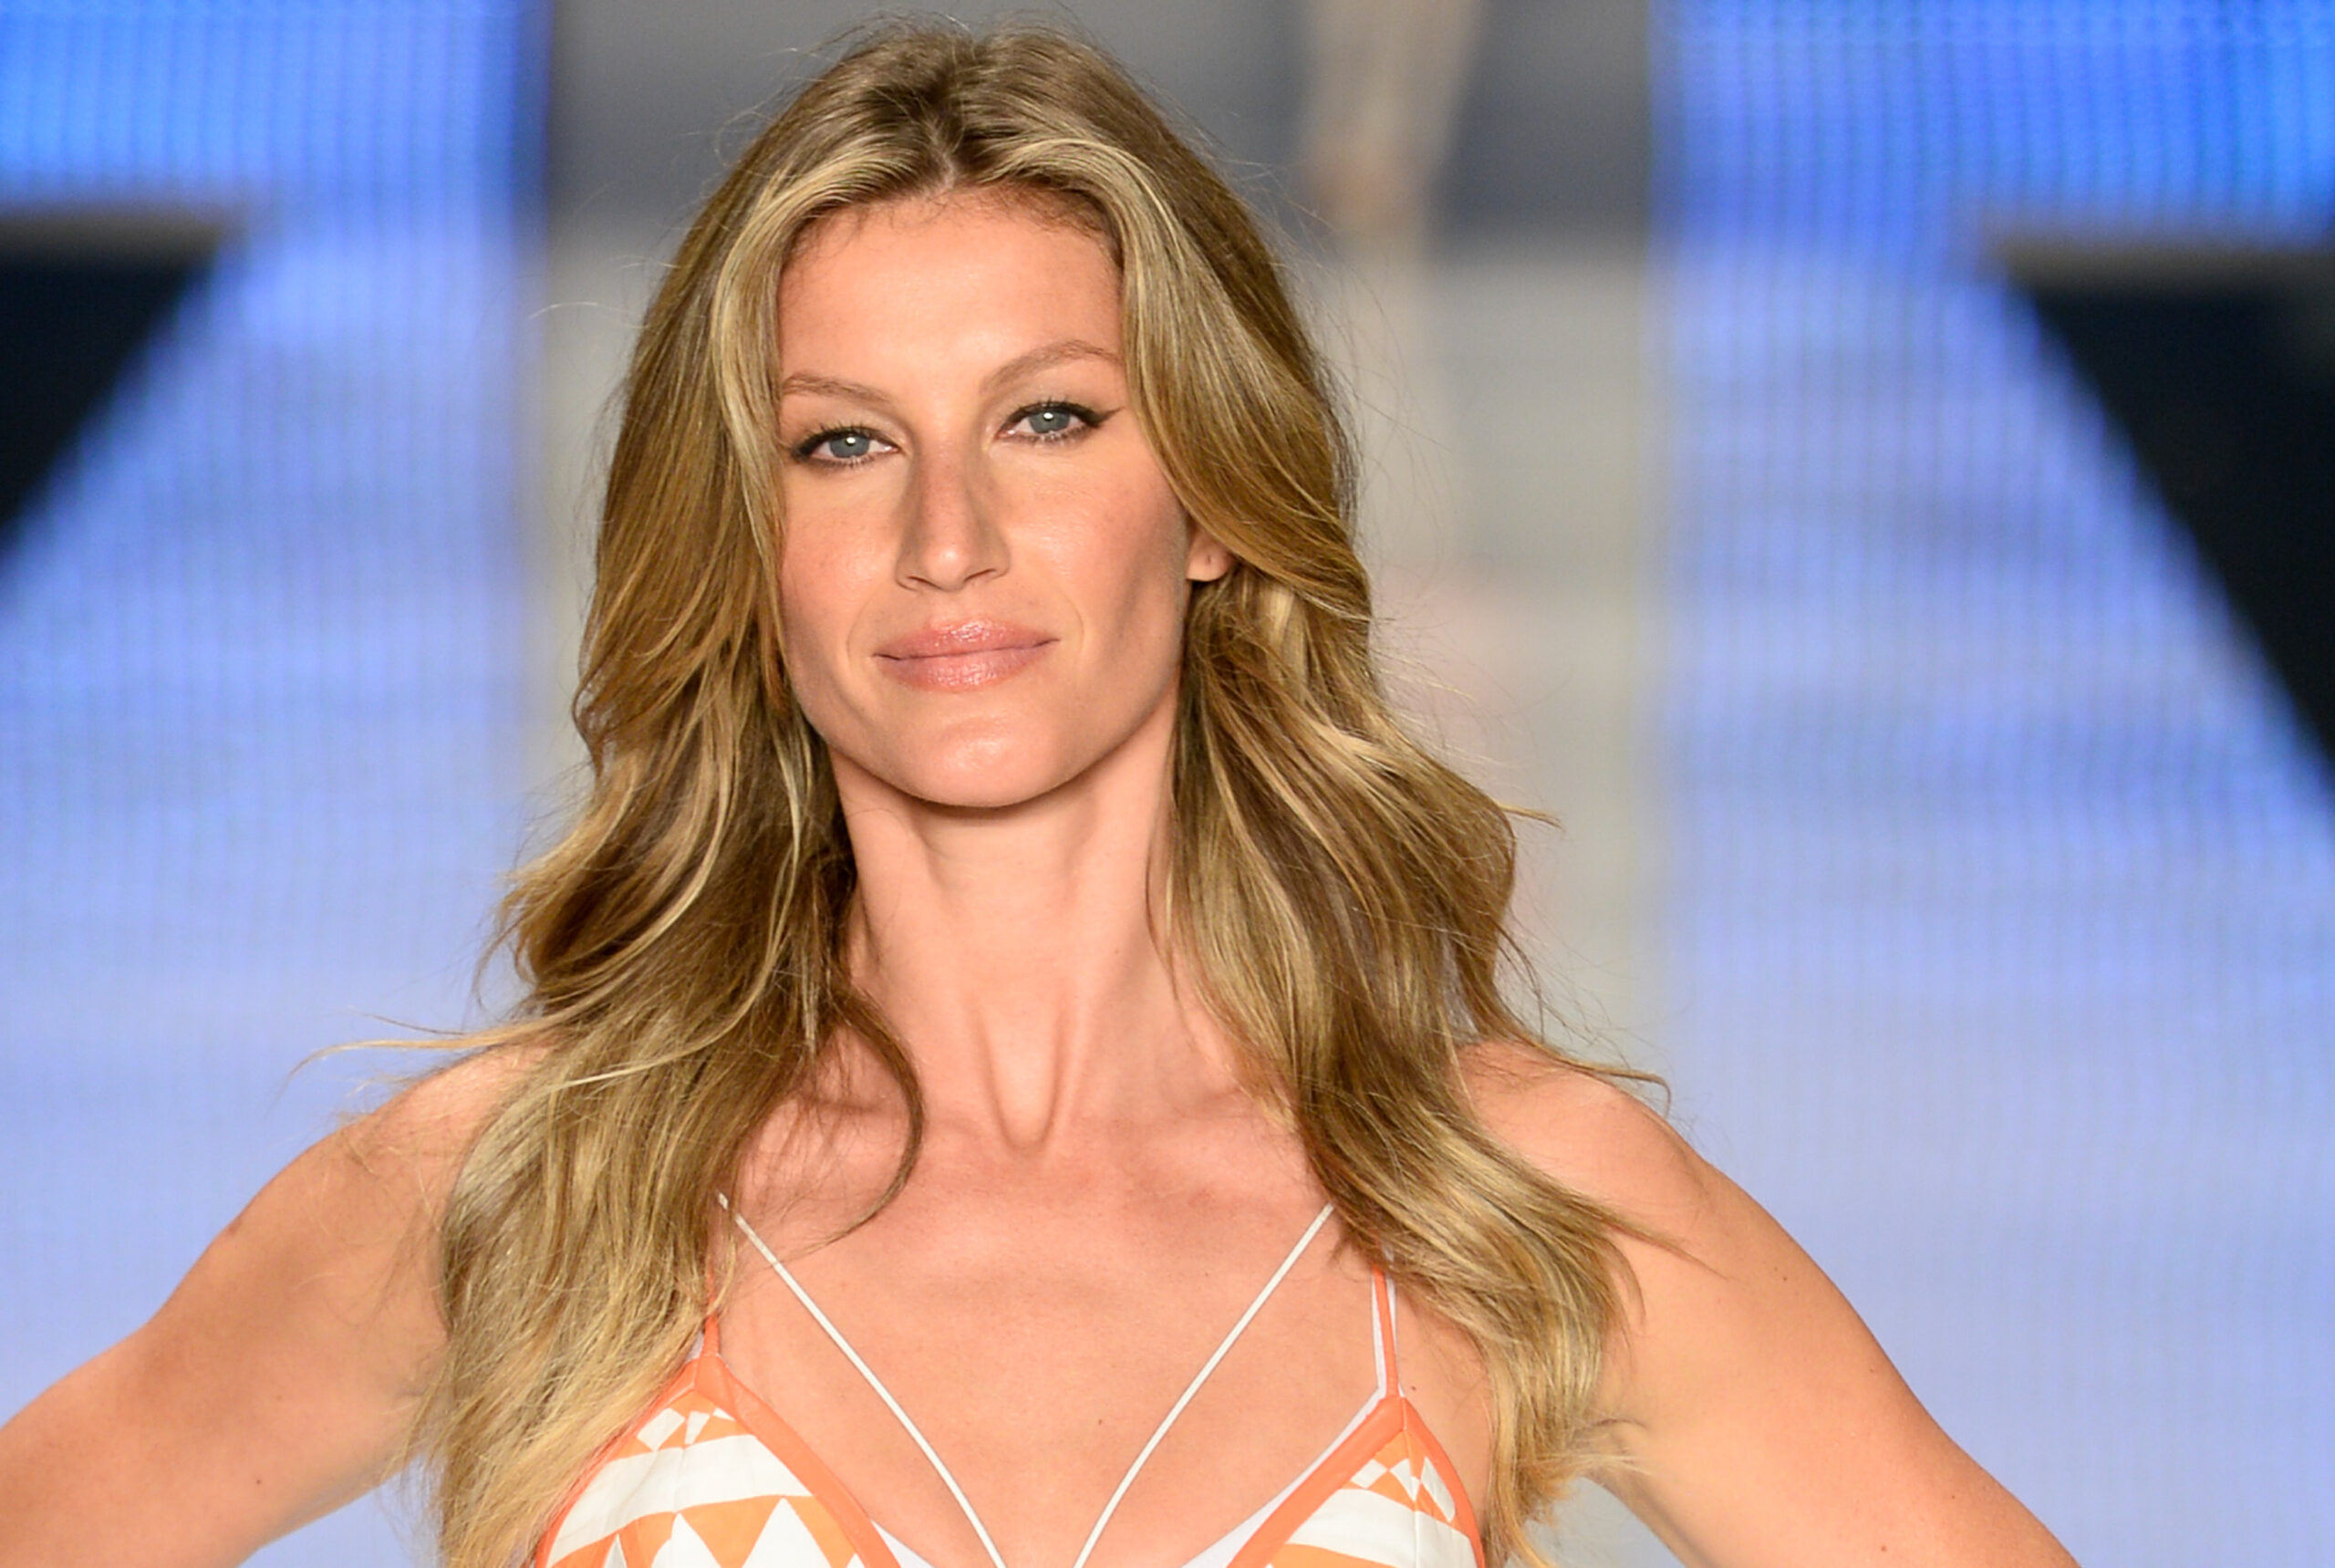 ‘They Called Me A Witch’: Gisele Bündchen Discusses Love For Astrology, Crystals, ‘The Power Of Nature’